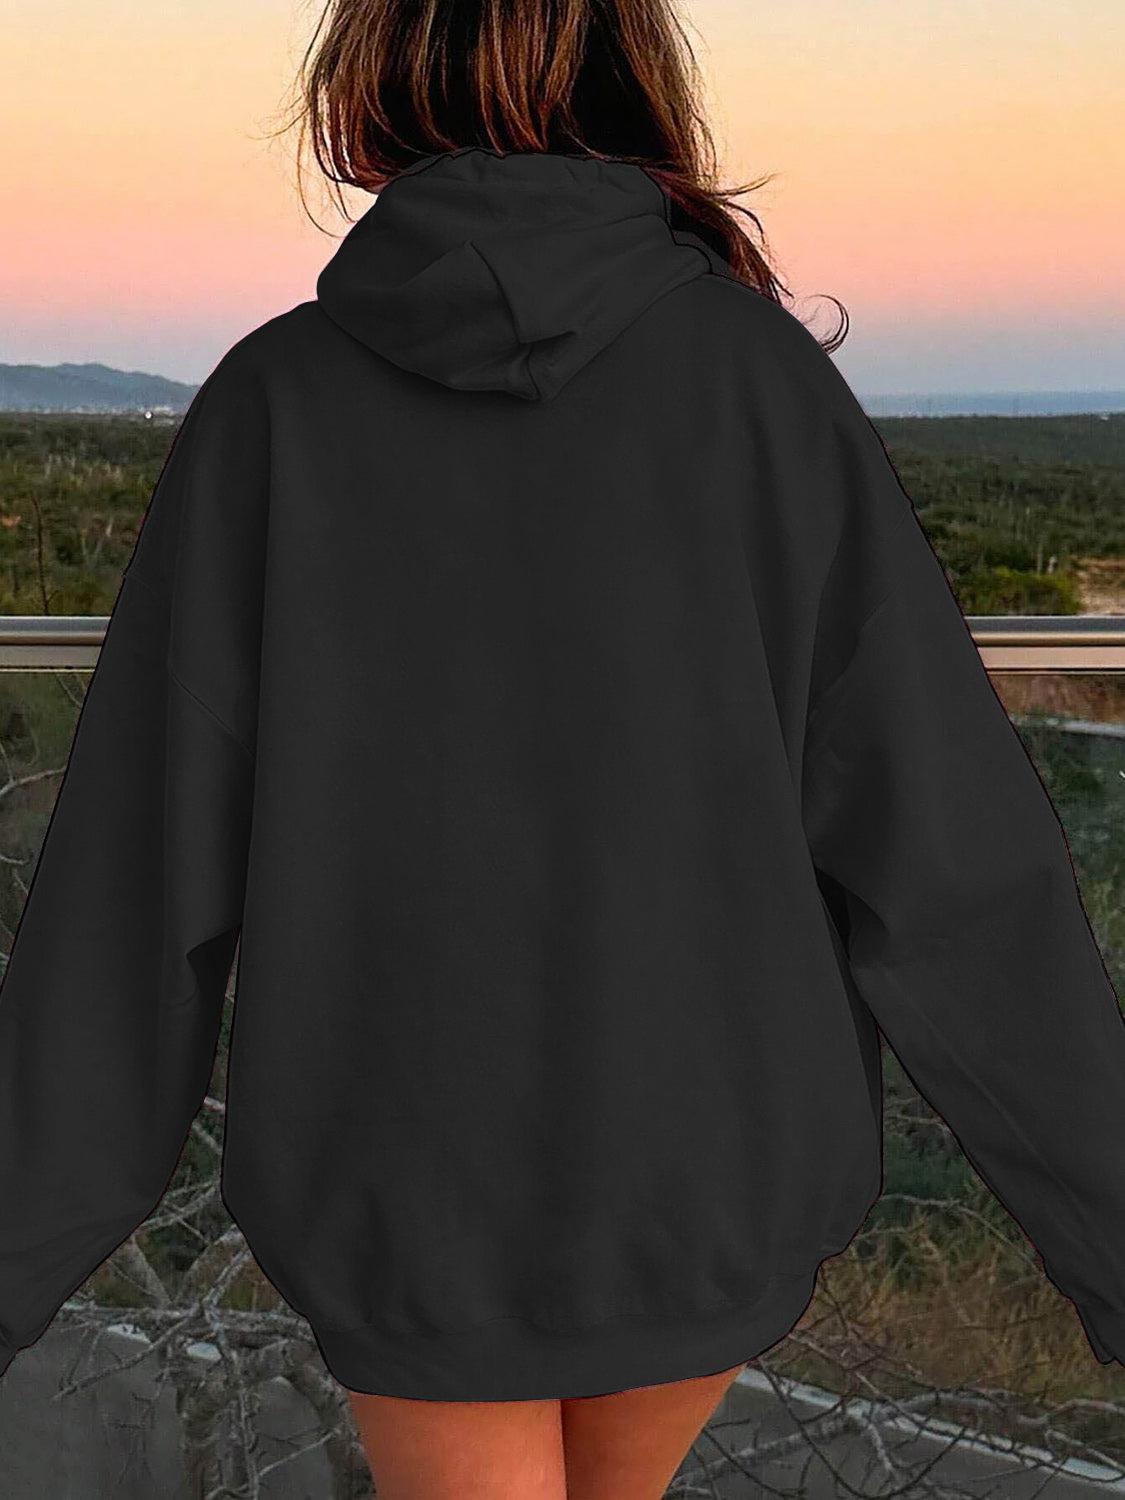 a woman in a black hoodie looking at the sunset